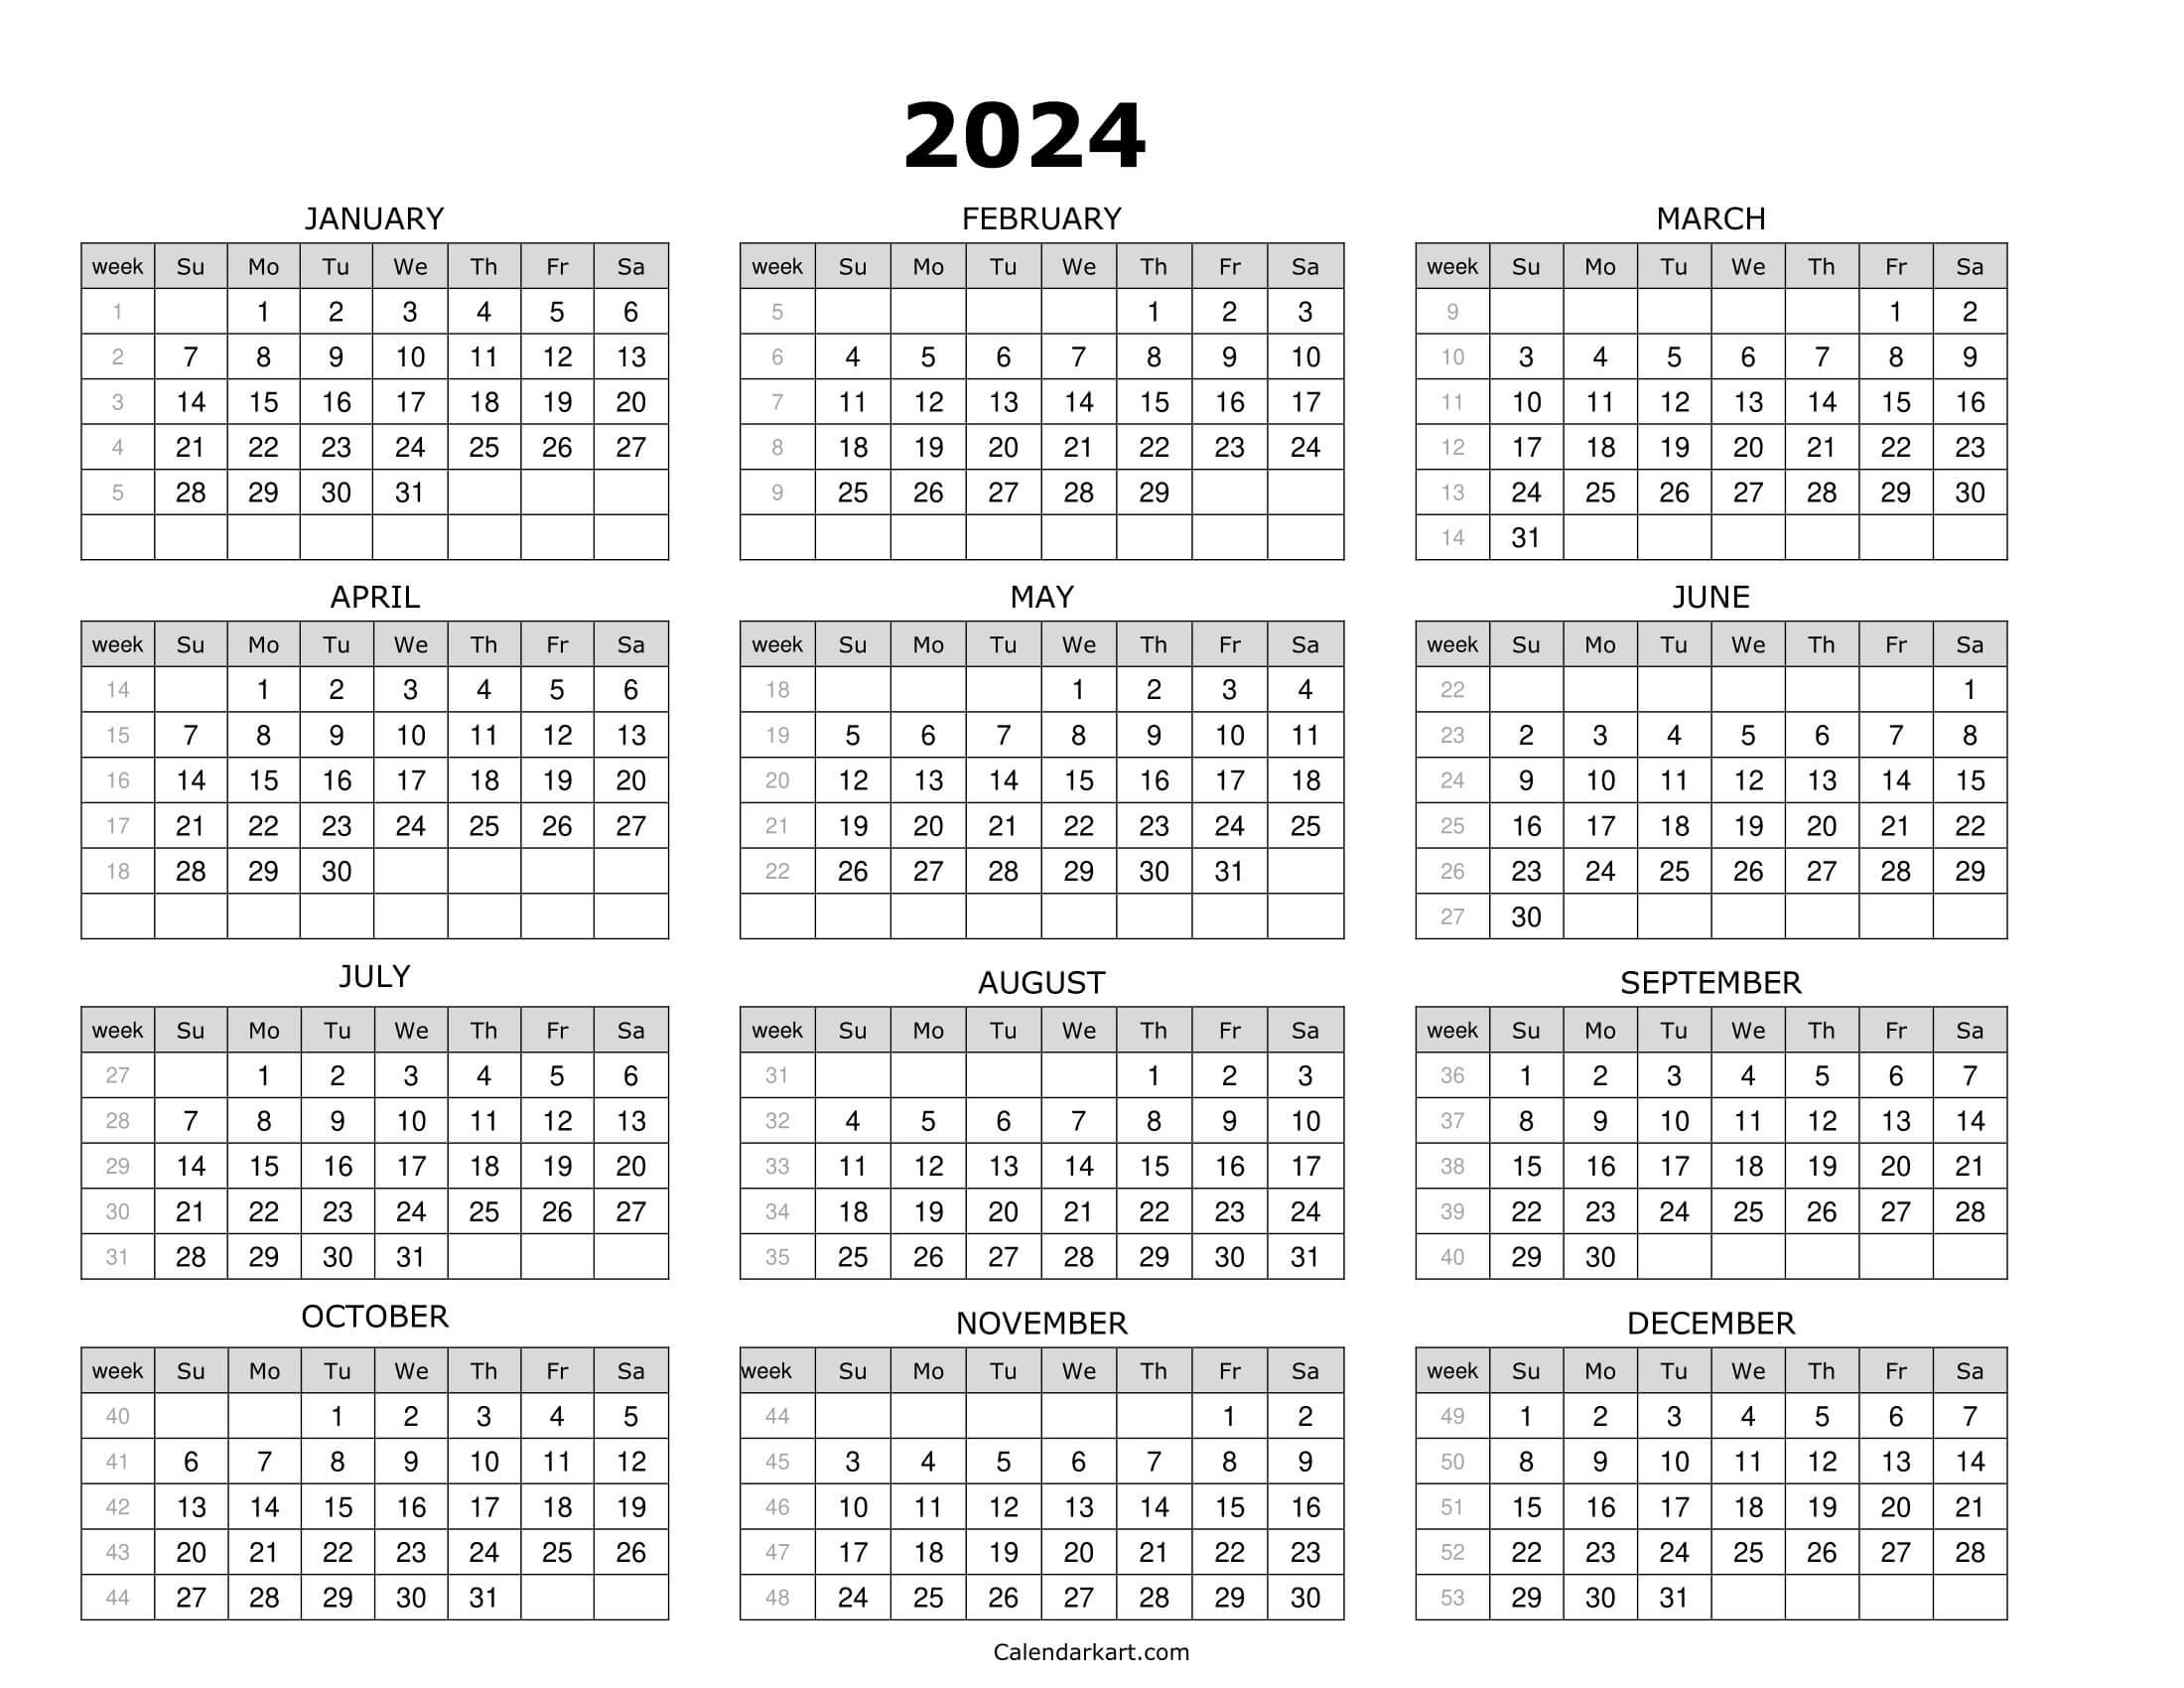 Download Printable Year At Glance Calendar 2024 | Calendarkart throughout Free Printable Calendar 2024 Date And Time